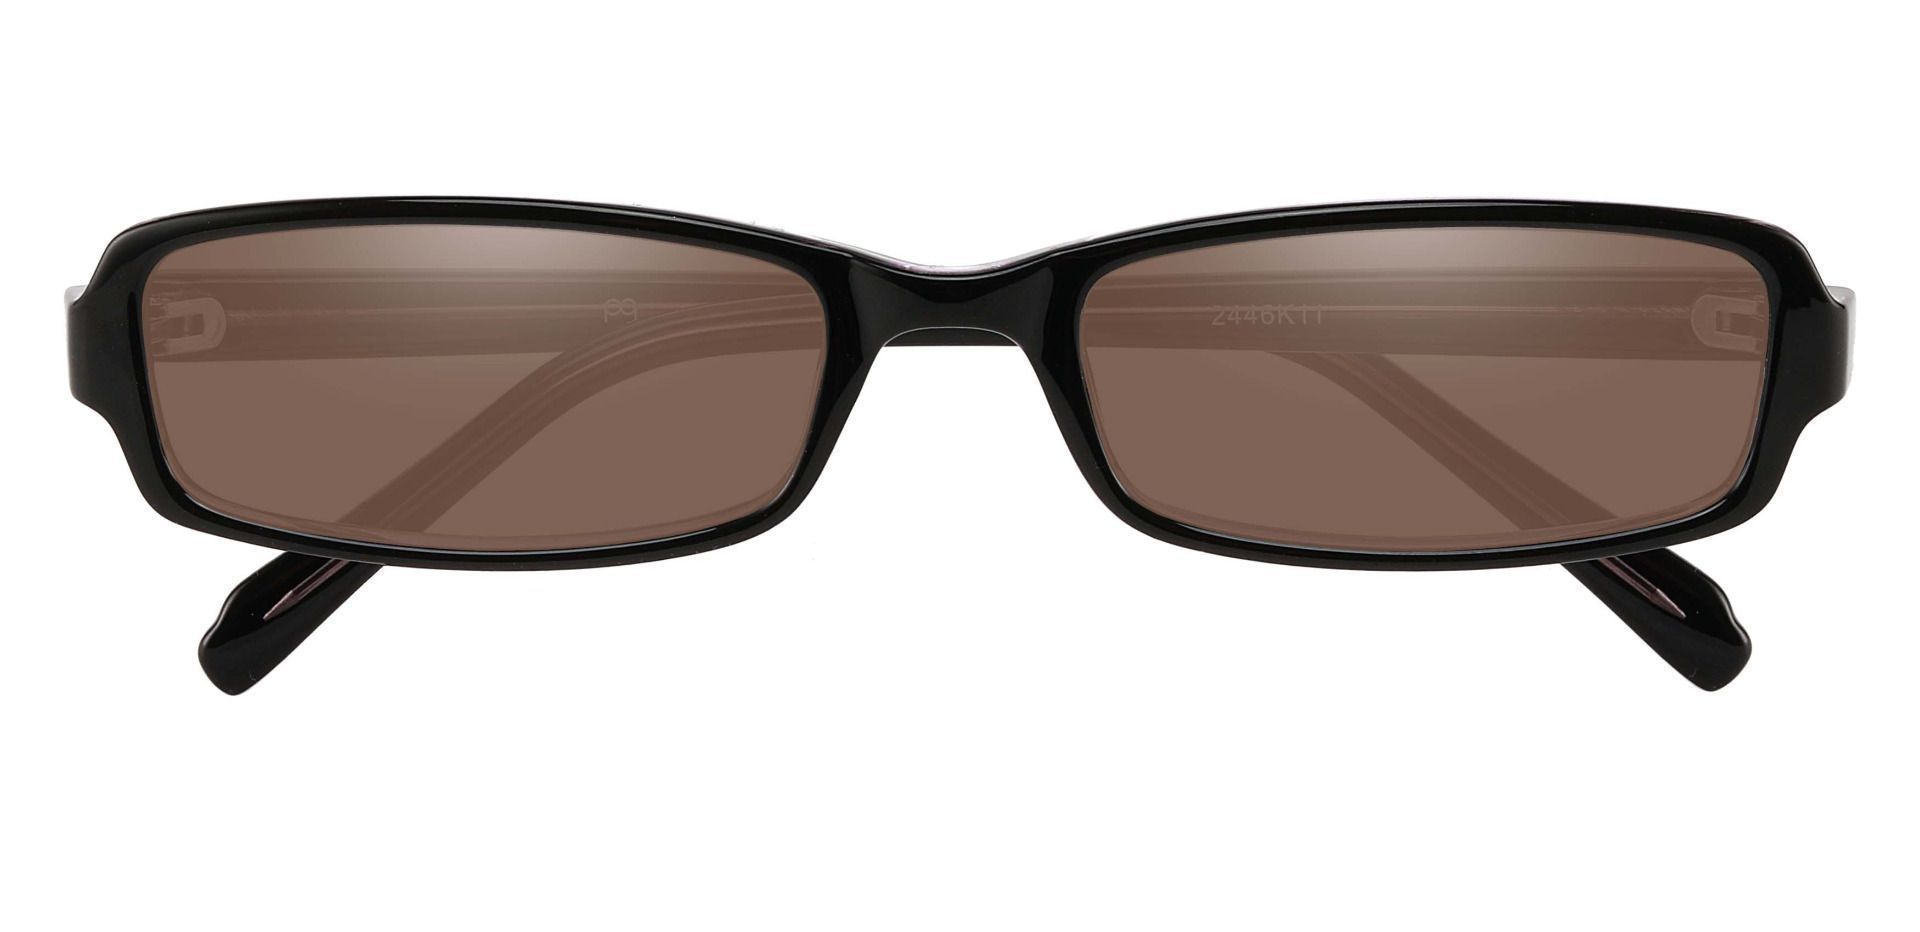 Thyme Rectangle Single Vision Sunglasses - Black Frame With Brown Lenses